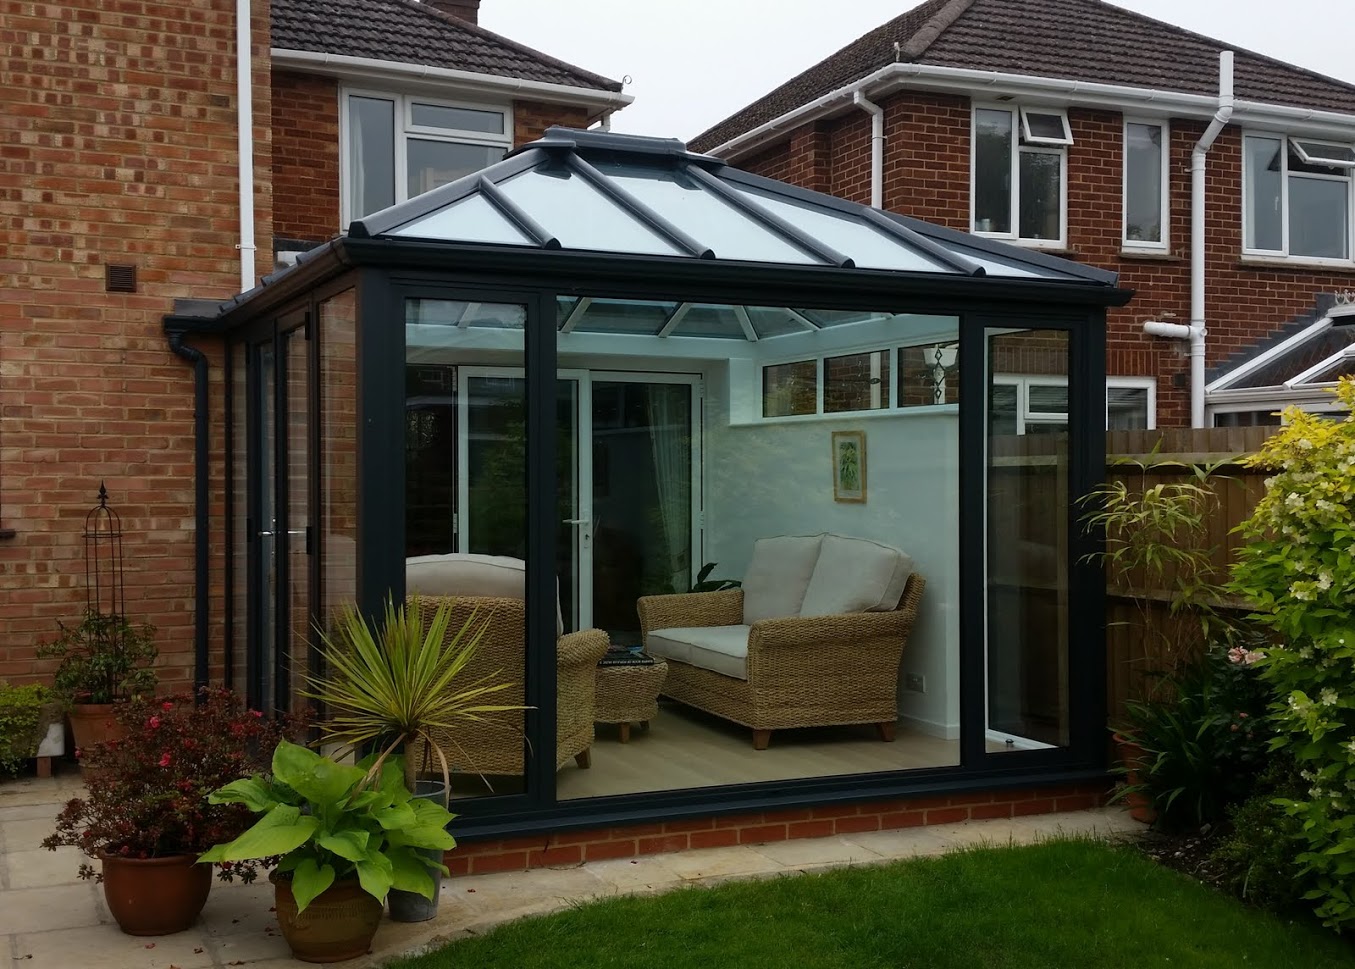 Outside view of a cosy Livin room conservatory design ideal for reading.